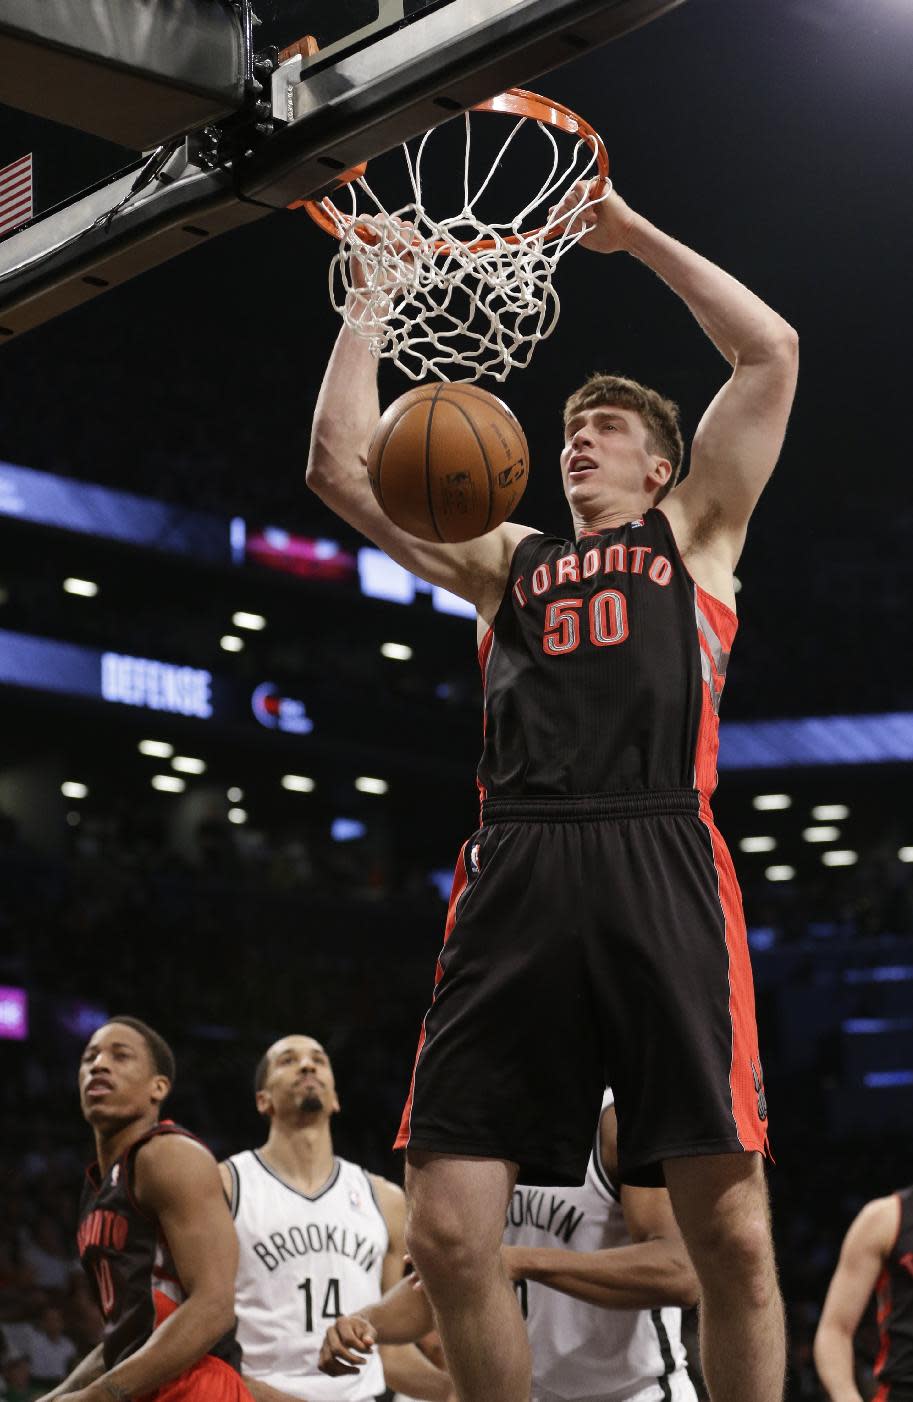 Toronto Raptors' Tyler Hansbrough (50) dunks as Brooklyn Nets' Shaun Livingston (14) watches during the first half of Game 3 of an NBA basketball first-round playoff series Friday, April 25, 2014, in New York. (AP Photo/Frank Franklin II)